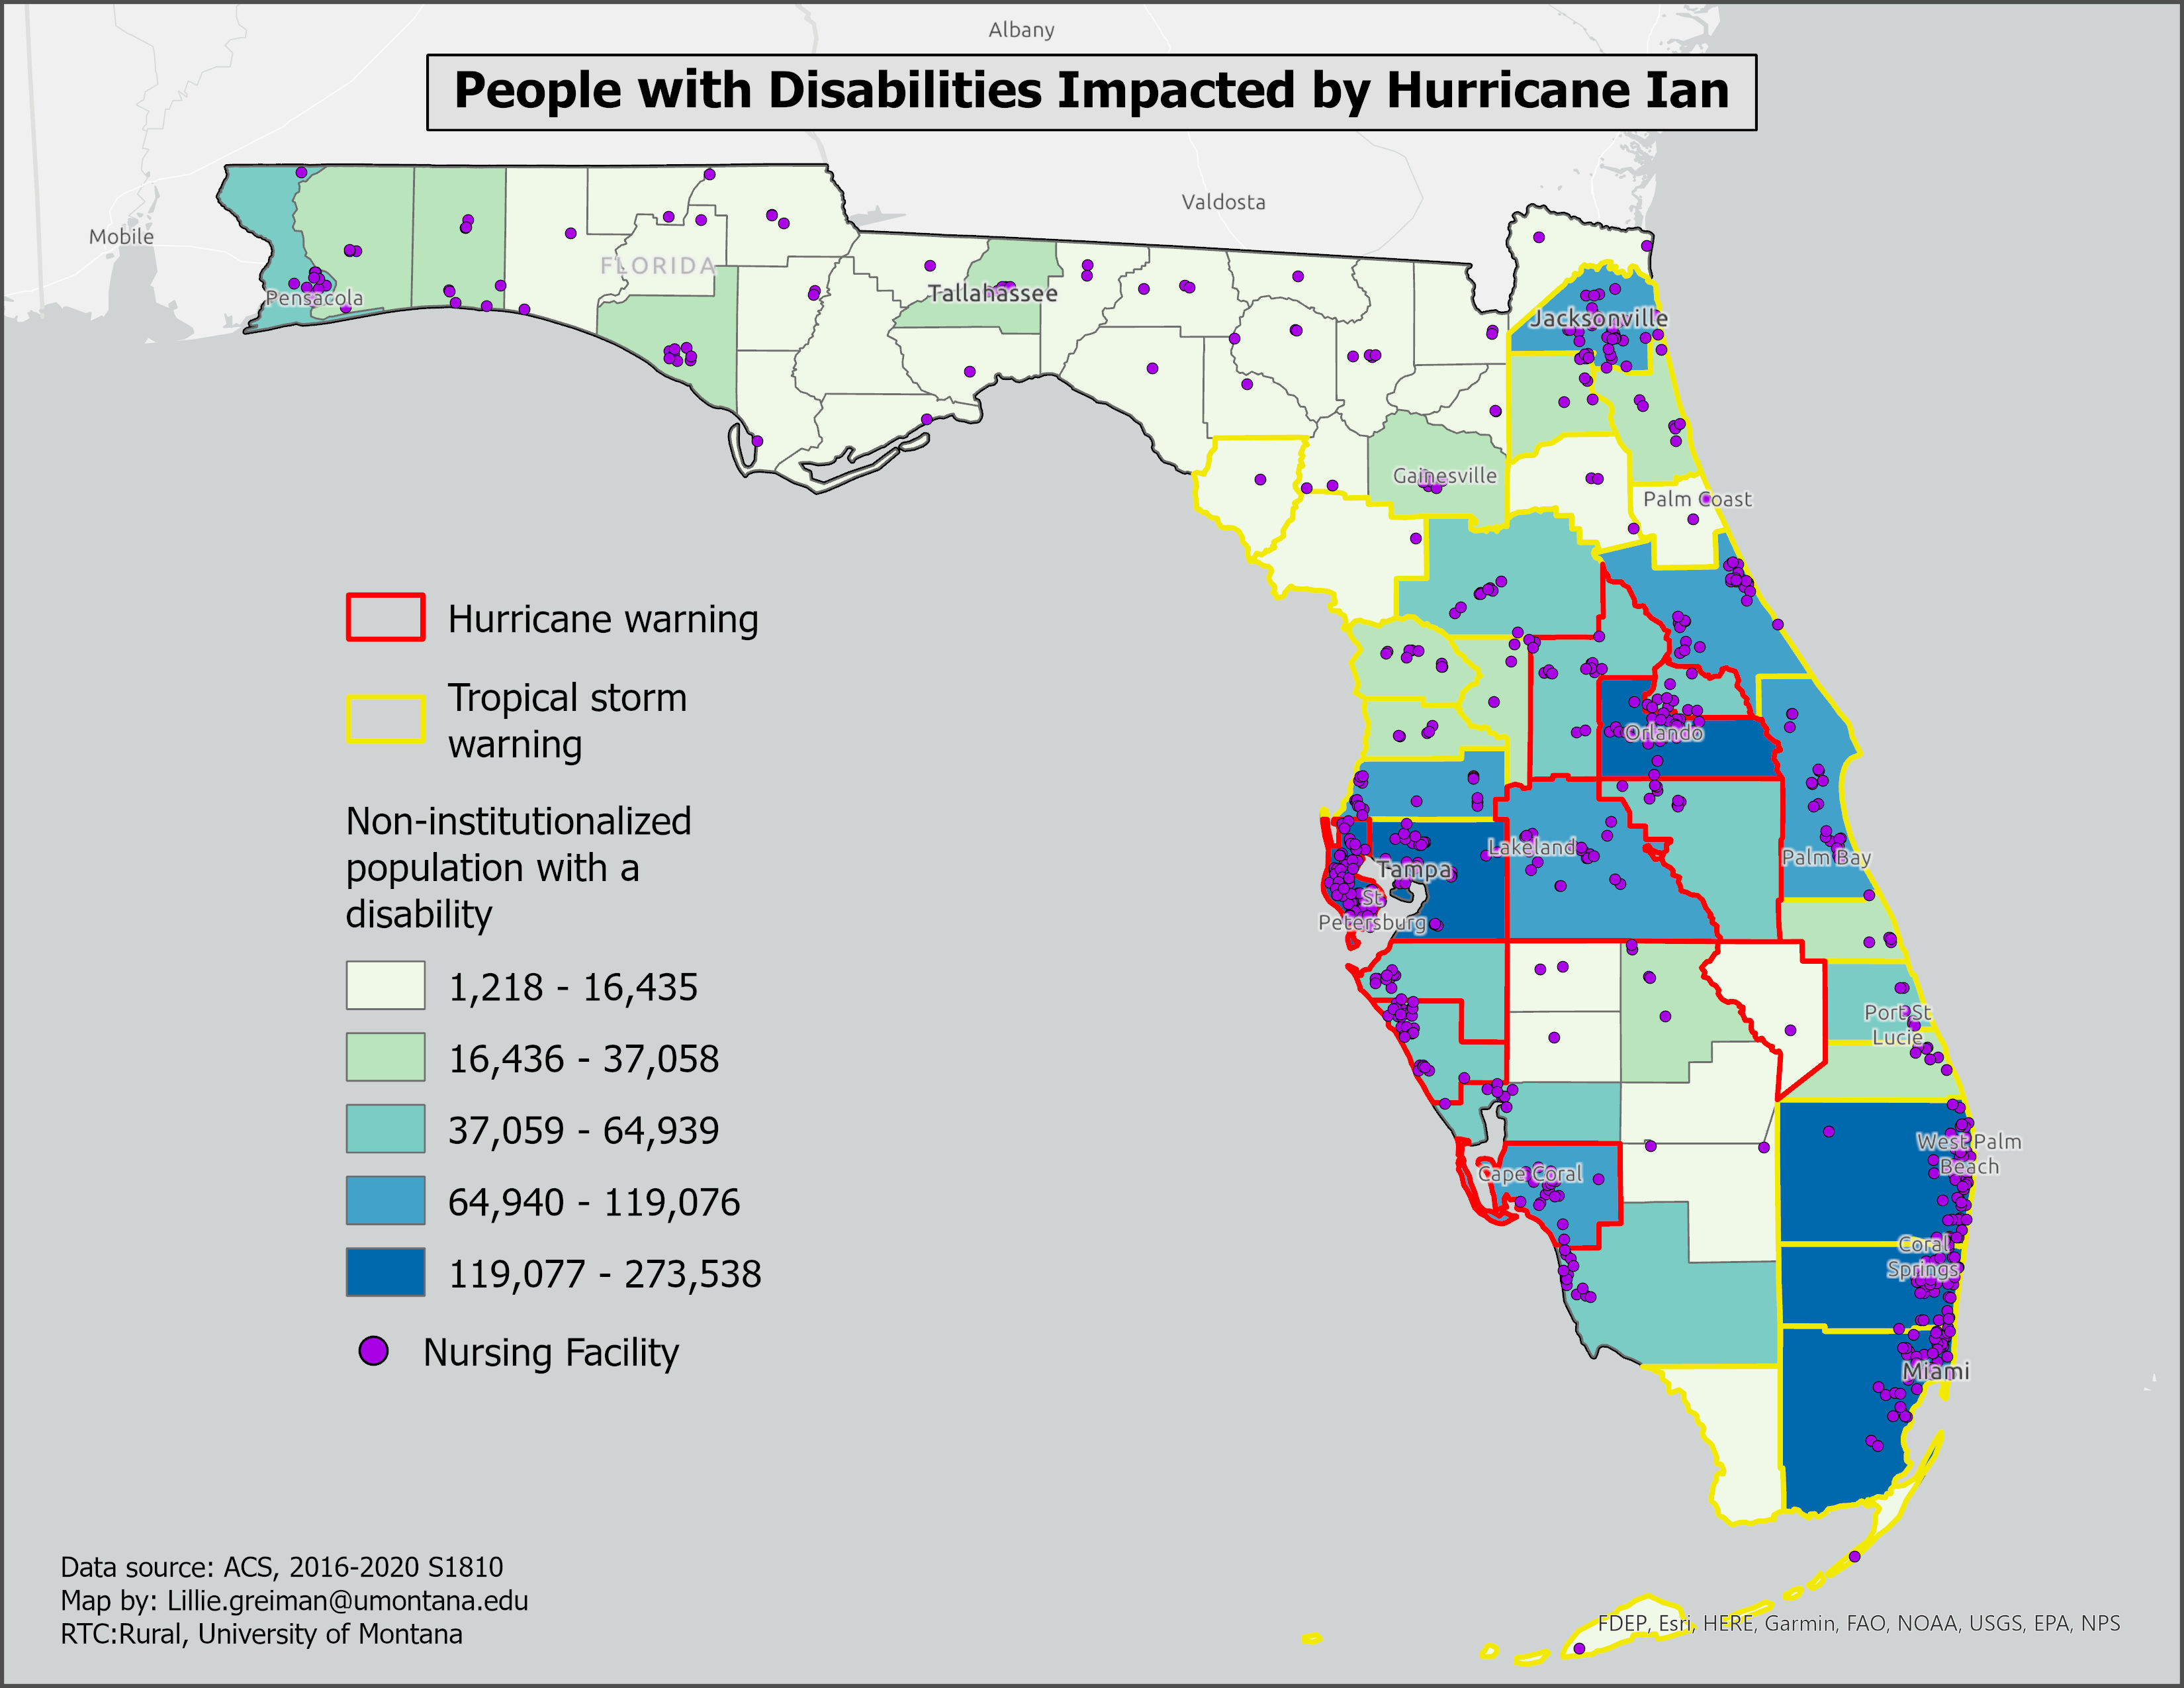 People with Disabilities Impacted by Hurricane Ian map showing population by county and locations of nursing facilities across the state. Tampa, Orlando, and the South-East corner are all highest population with between 119 thousand and 274 thousand people with disabilities in each county